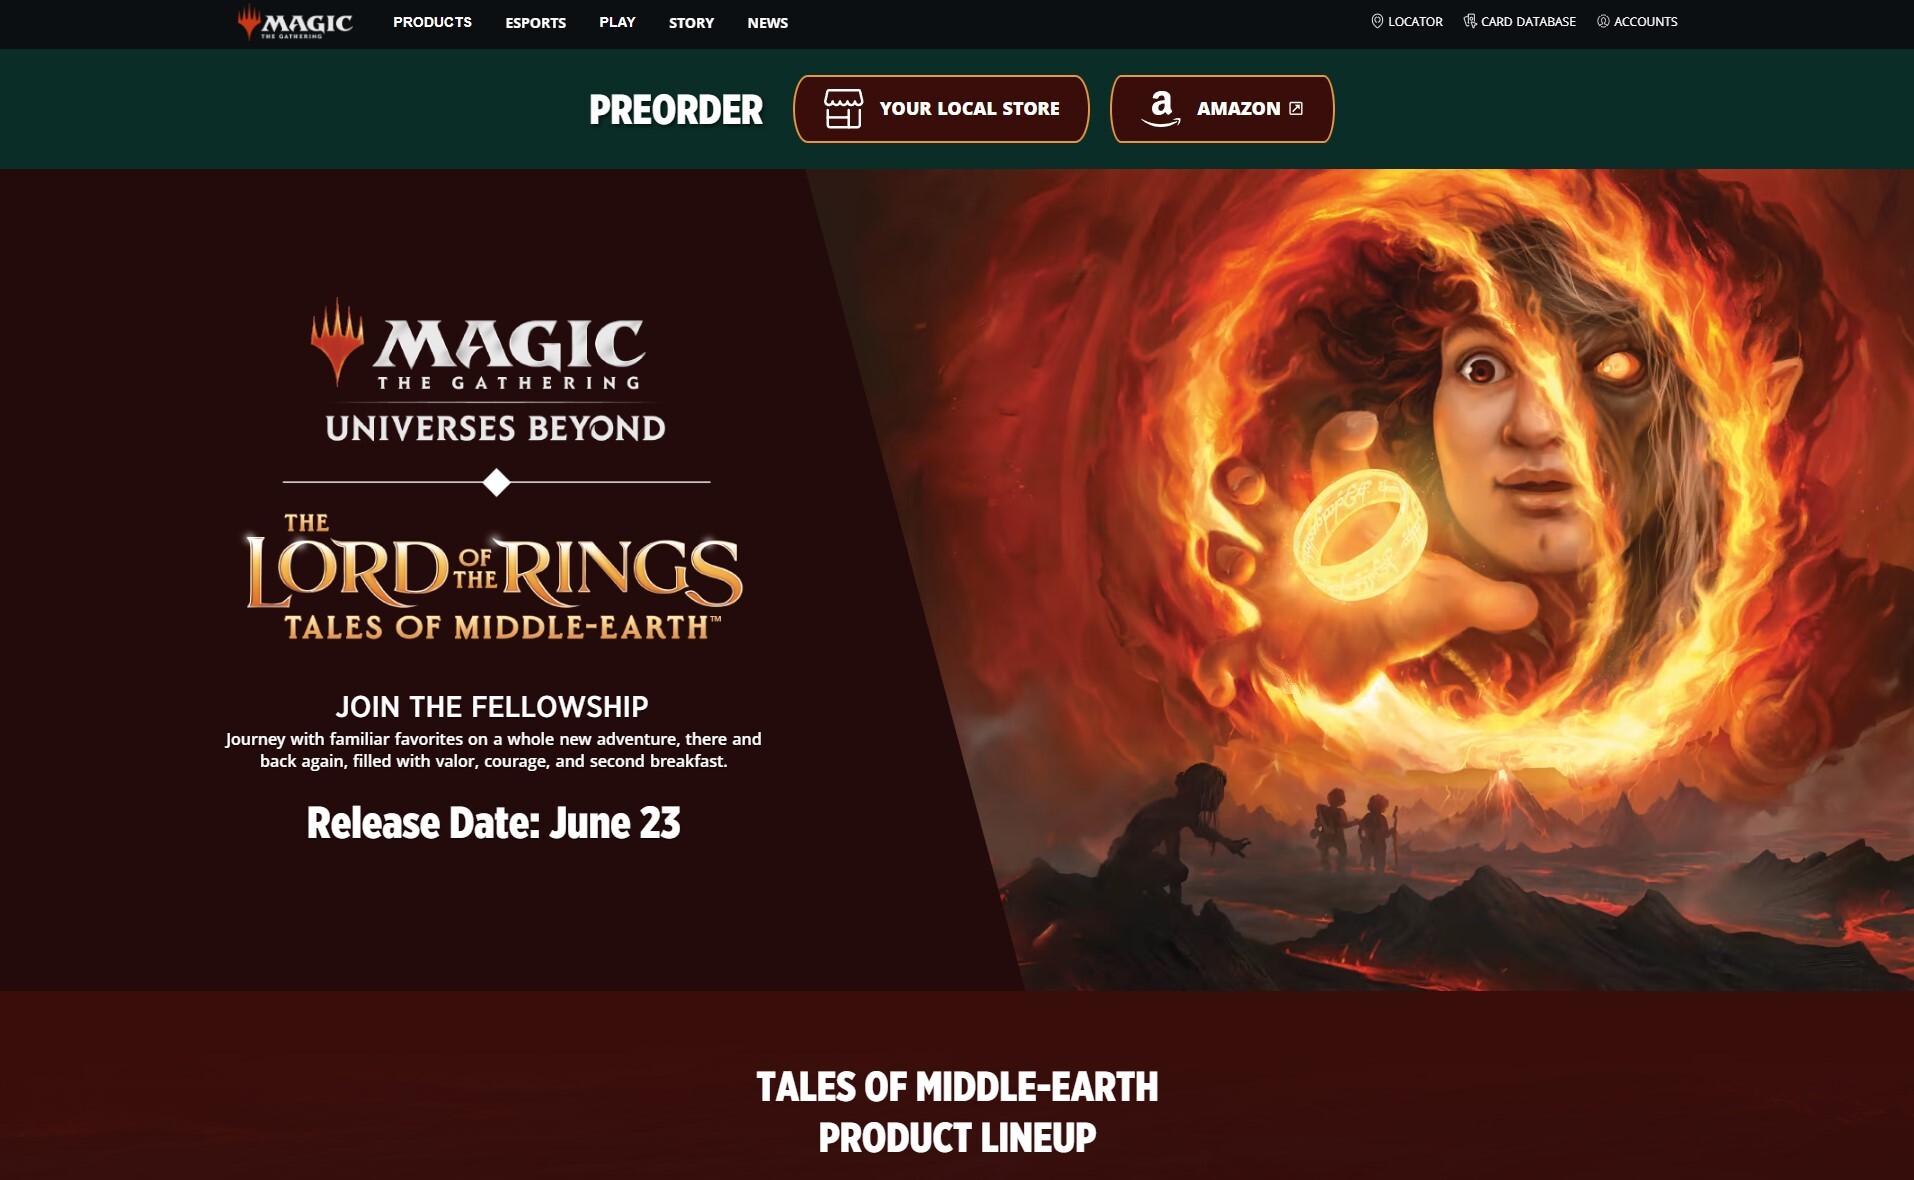 Lord of The Rings Online 64 bit client problem - Support - Lutris Forums